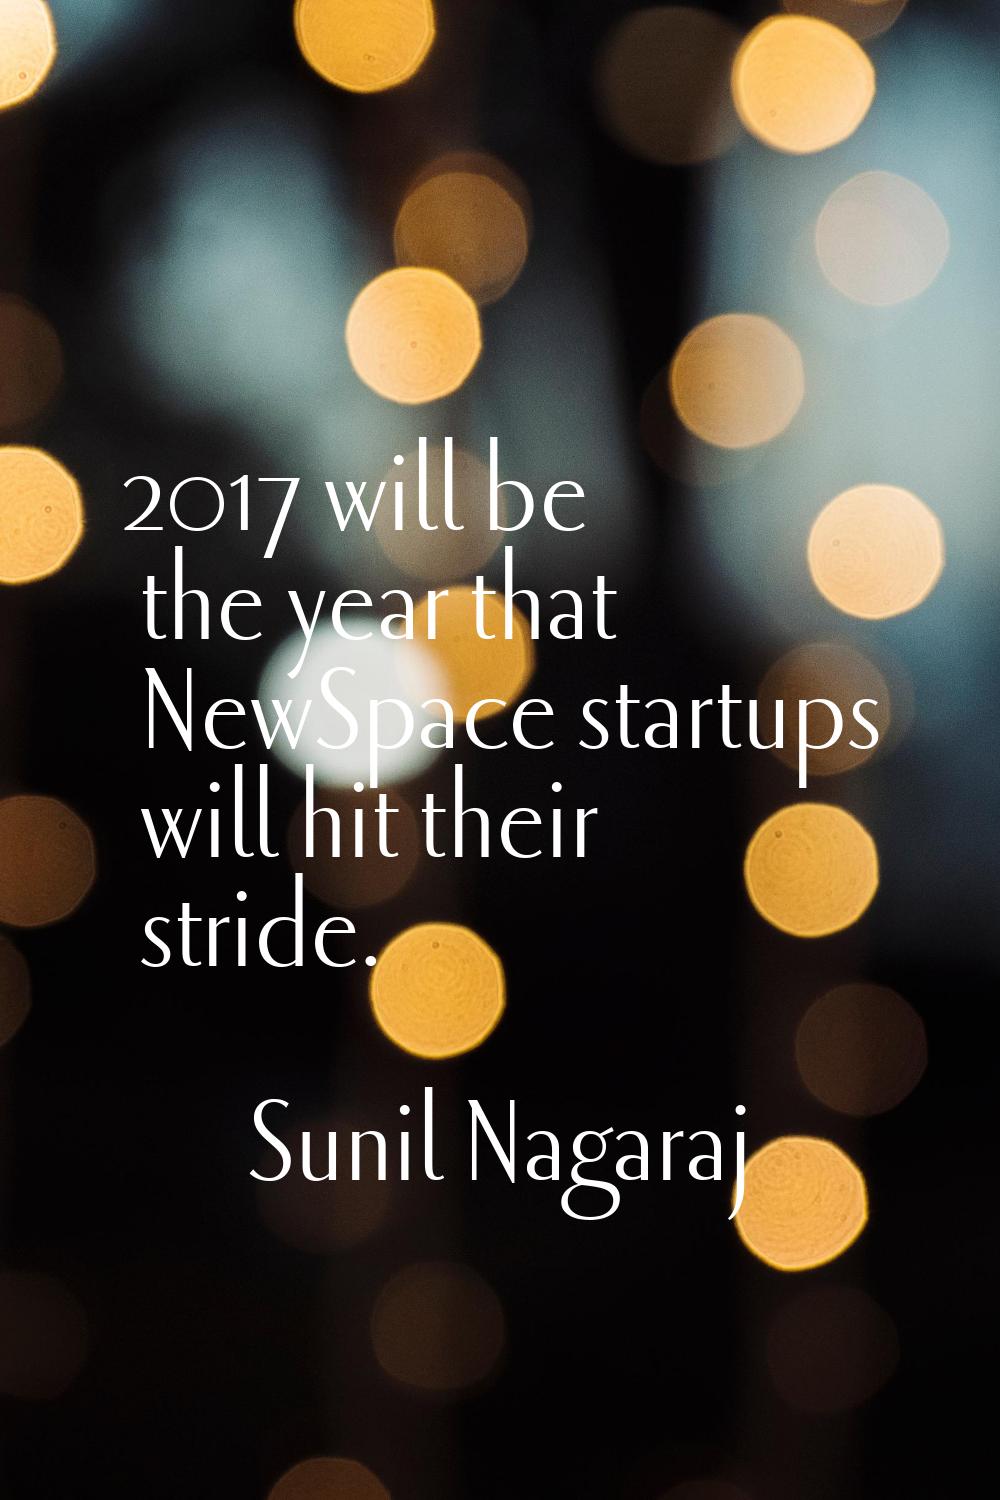 2017 will be the year that NewSpace startups will hit their stride.